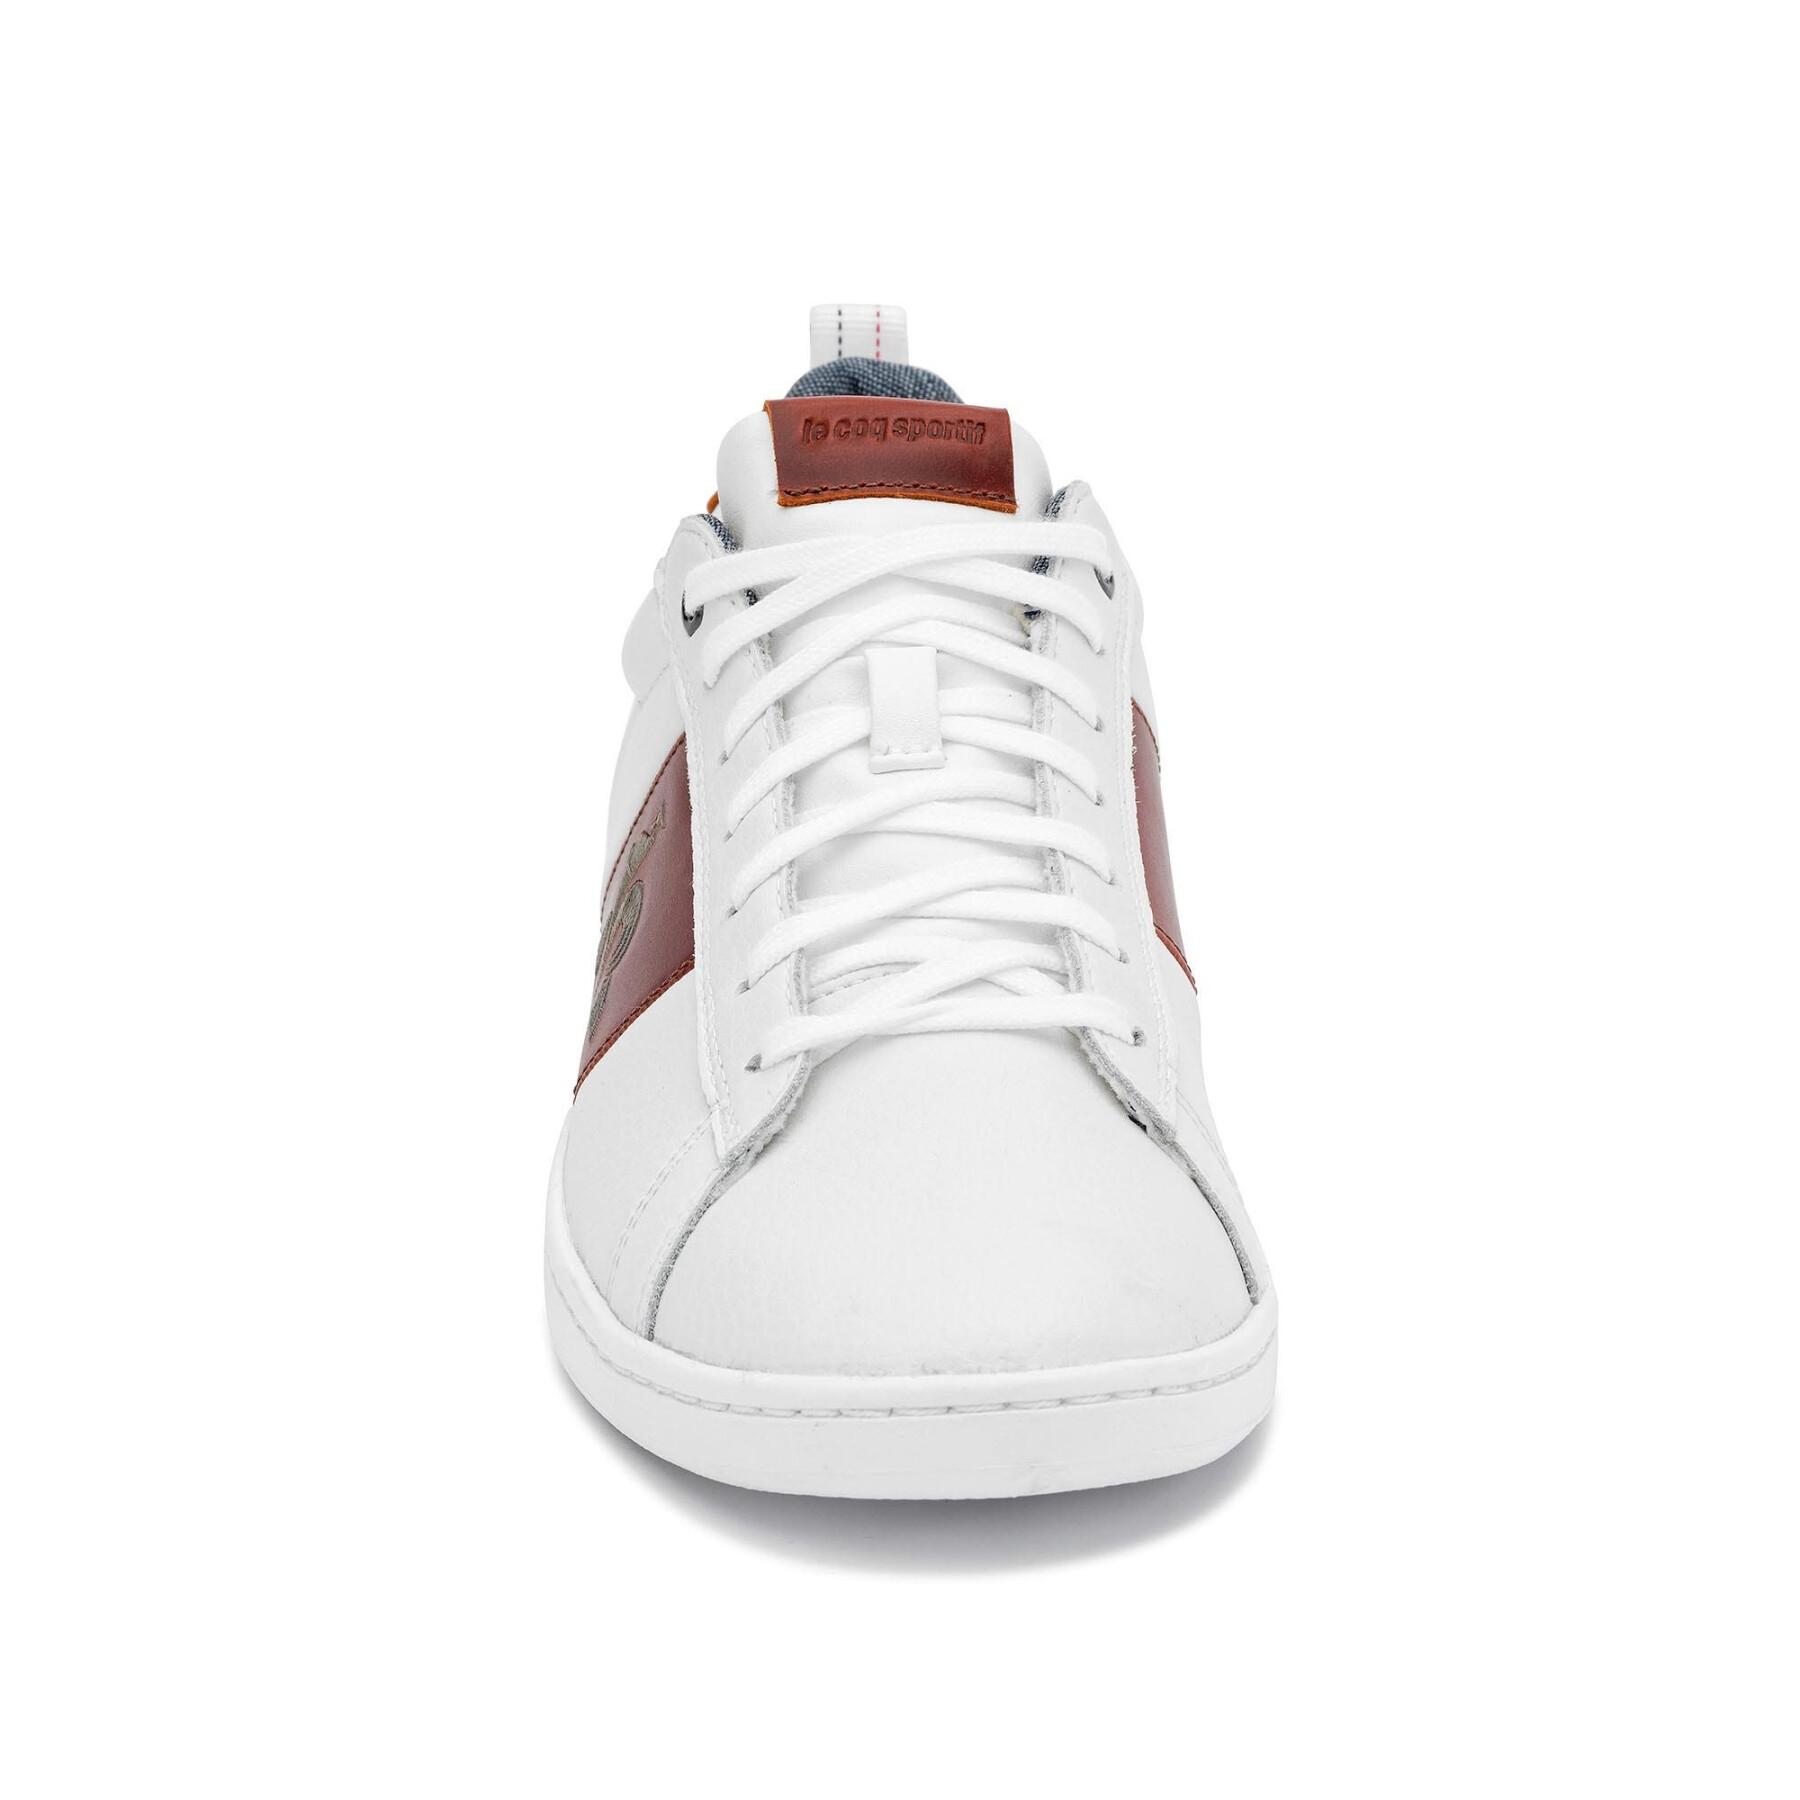 Formadores Le Coq Sportif Courtclassic Workwear